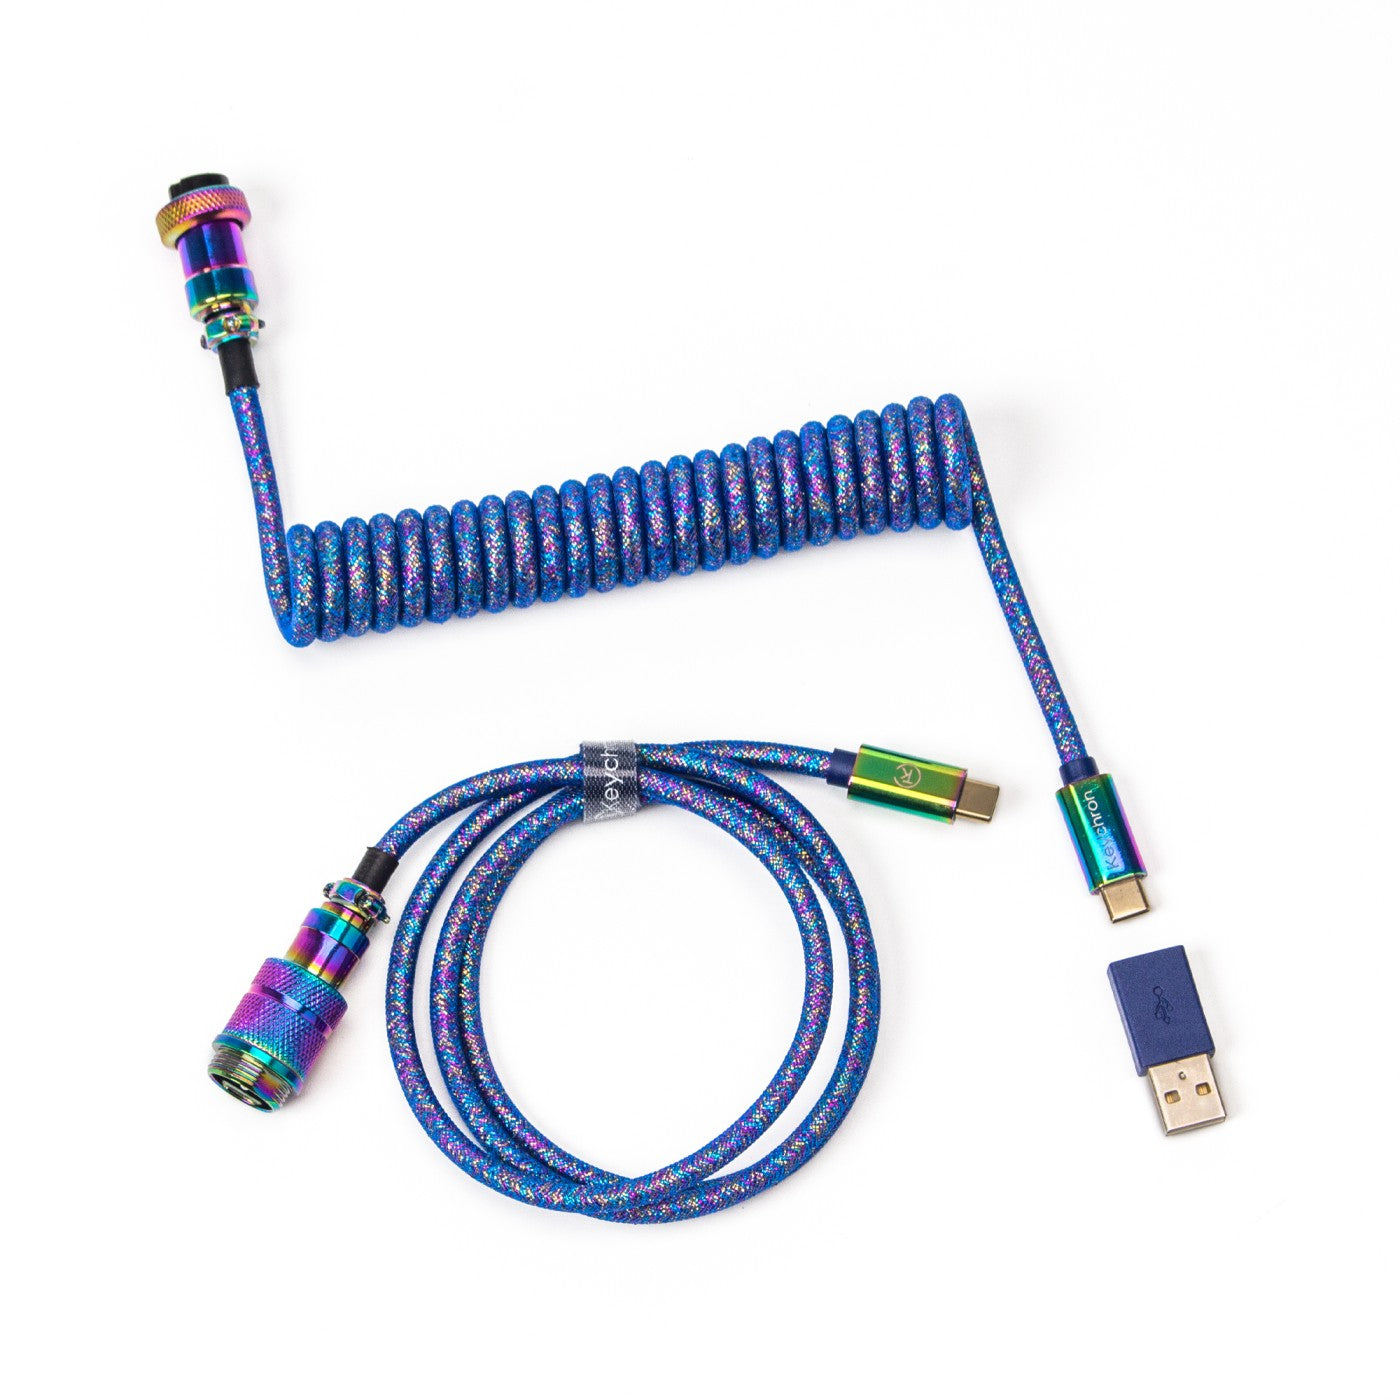 https://www.lemokey.com/cdn/shop/products/Keychron-Premium-Coiled-Cable-Aviator-Type-C-Cable-Blue.jpg?v=1693211009&width=1445